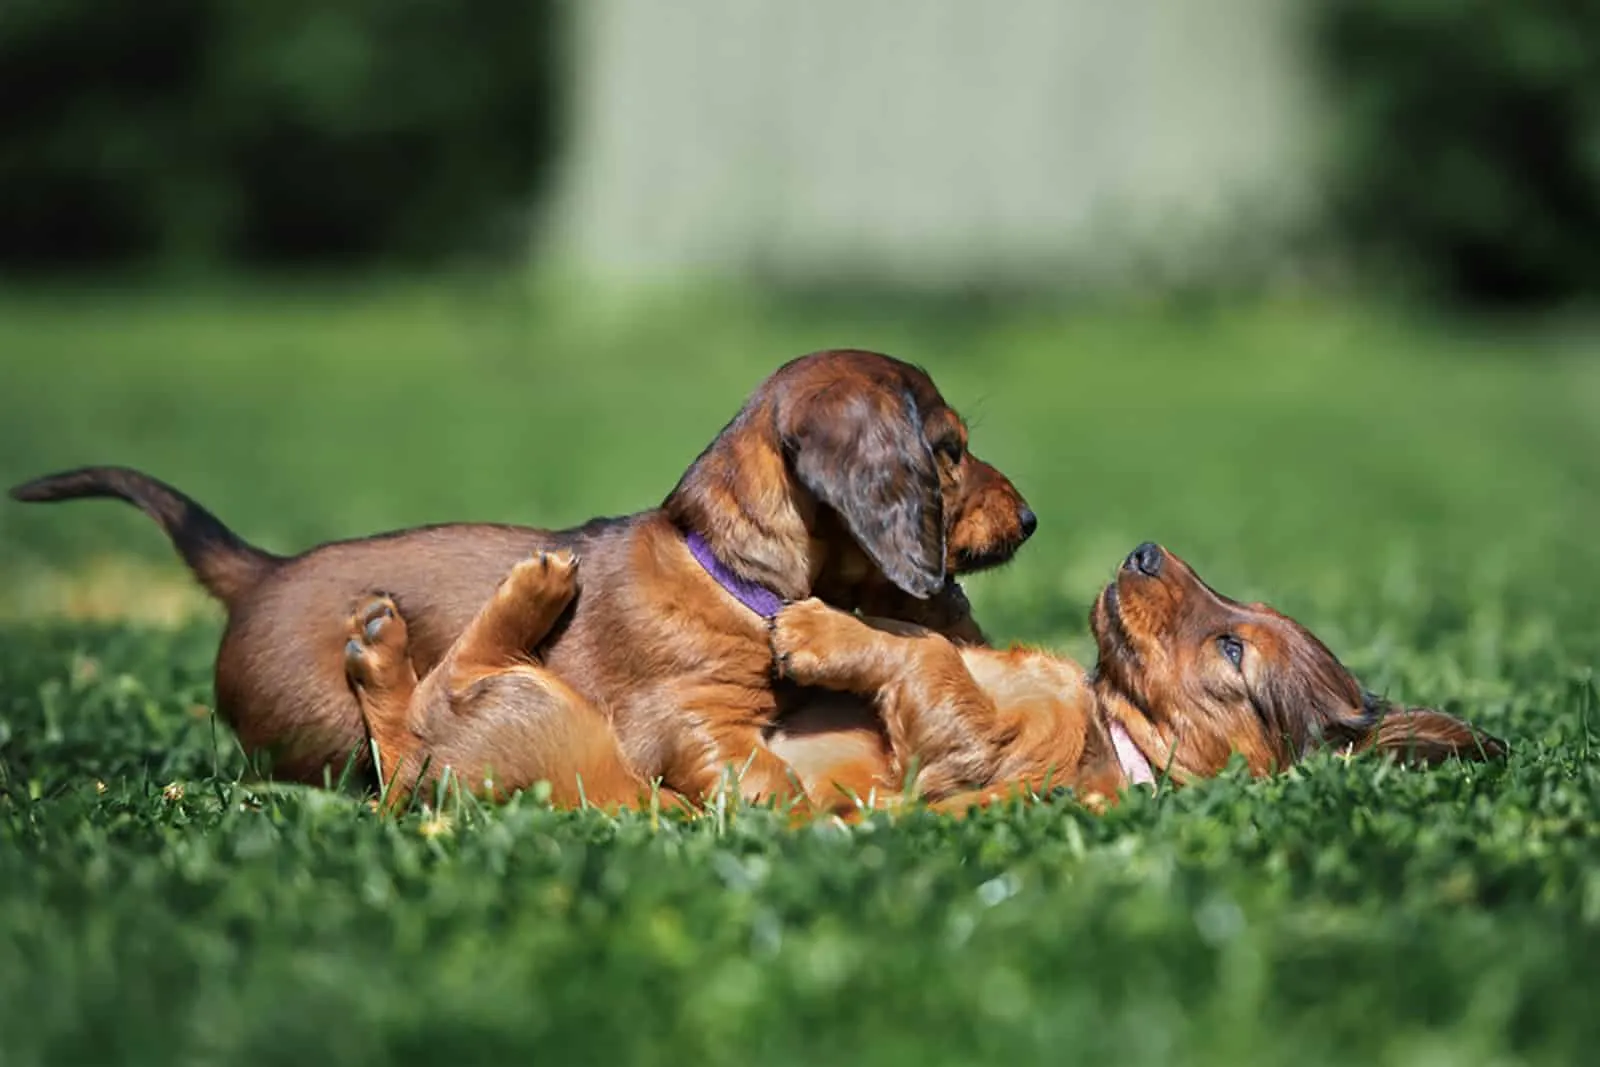 two adorable dachshund puppies playing together on the grass